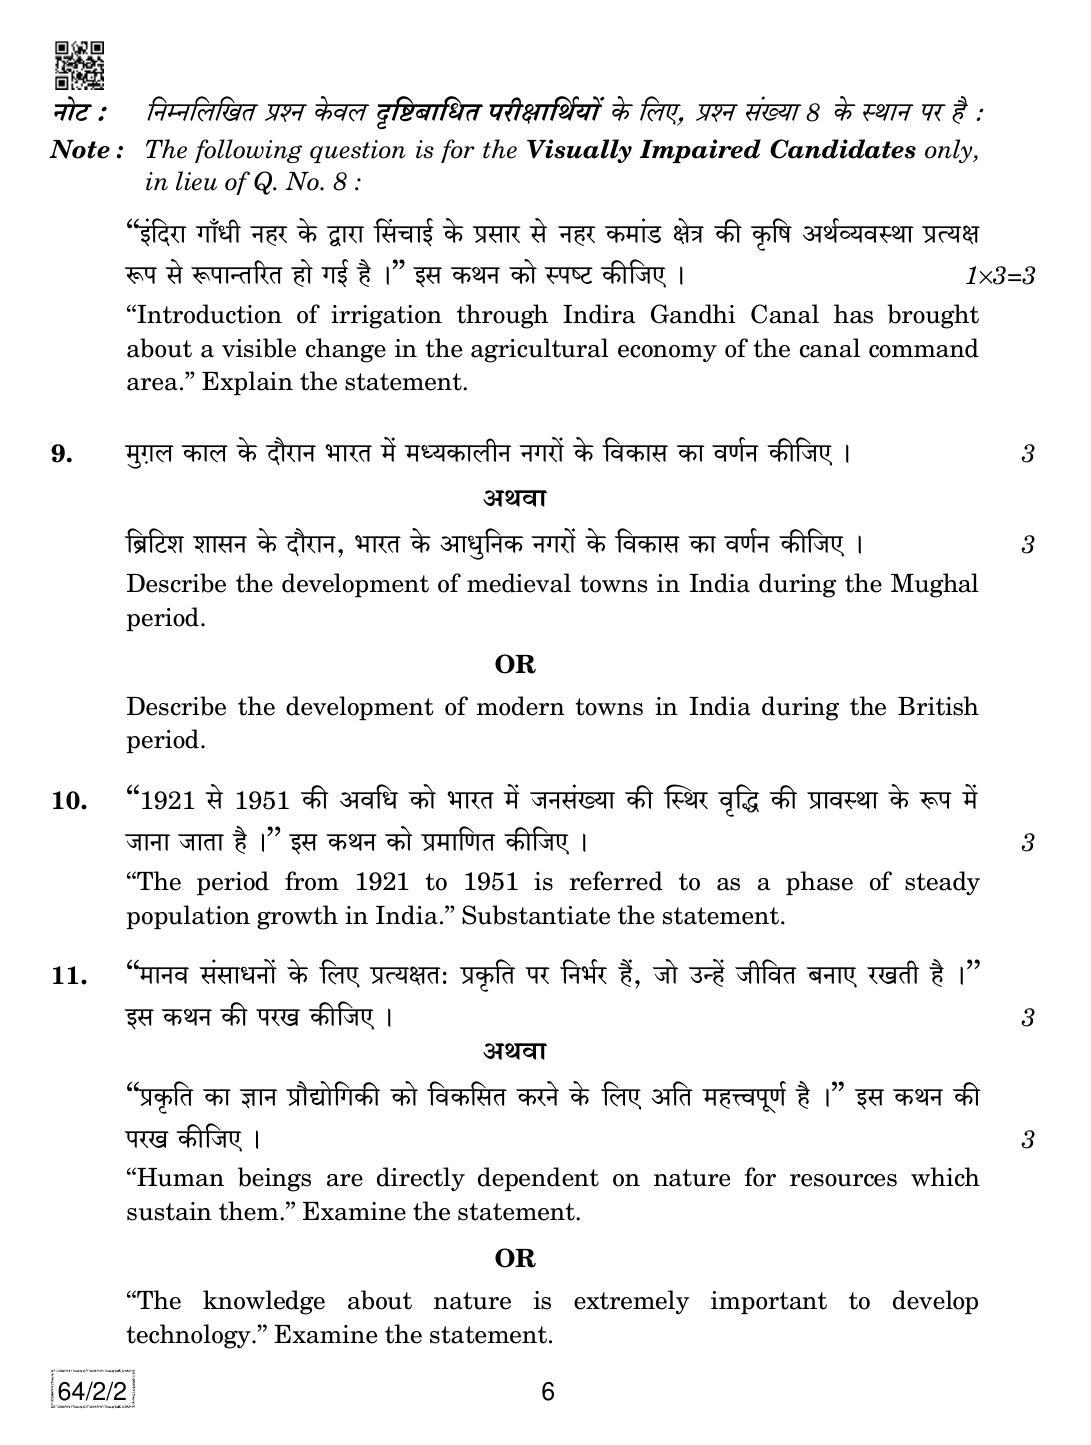 CBSE Class 12 64-2-2 Geography 2019 Question Paper - Page 6